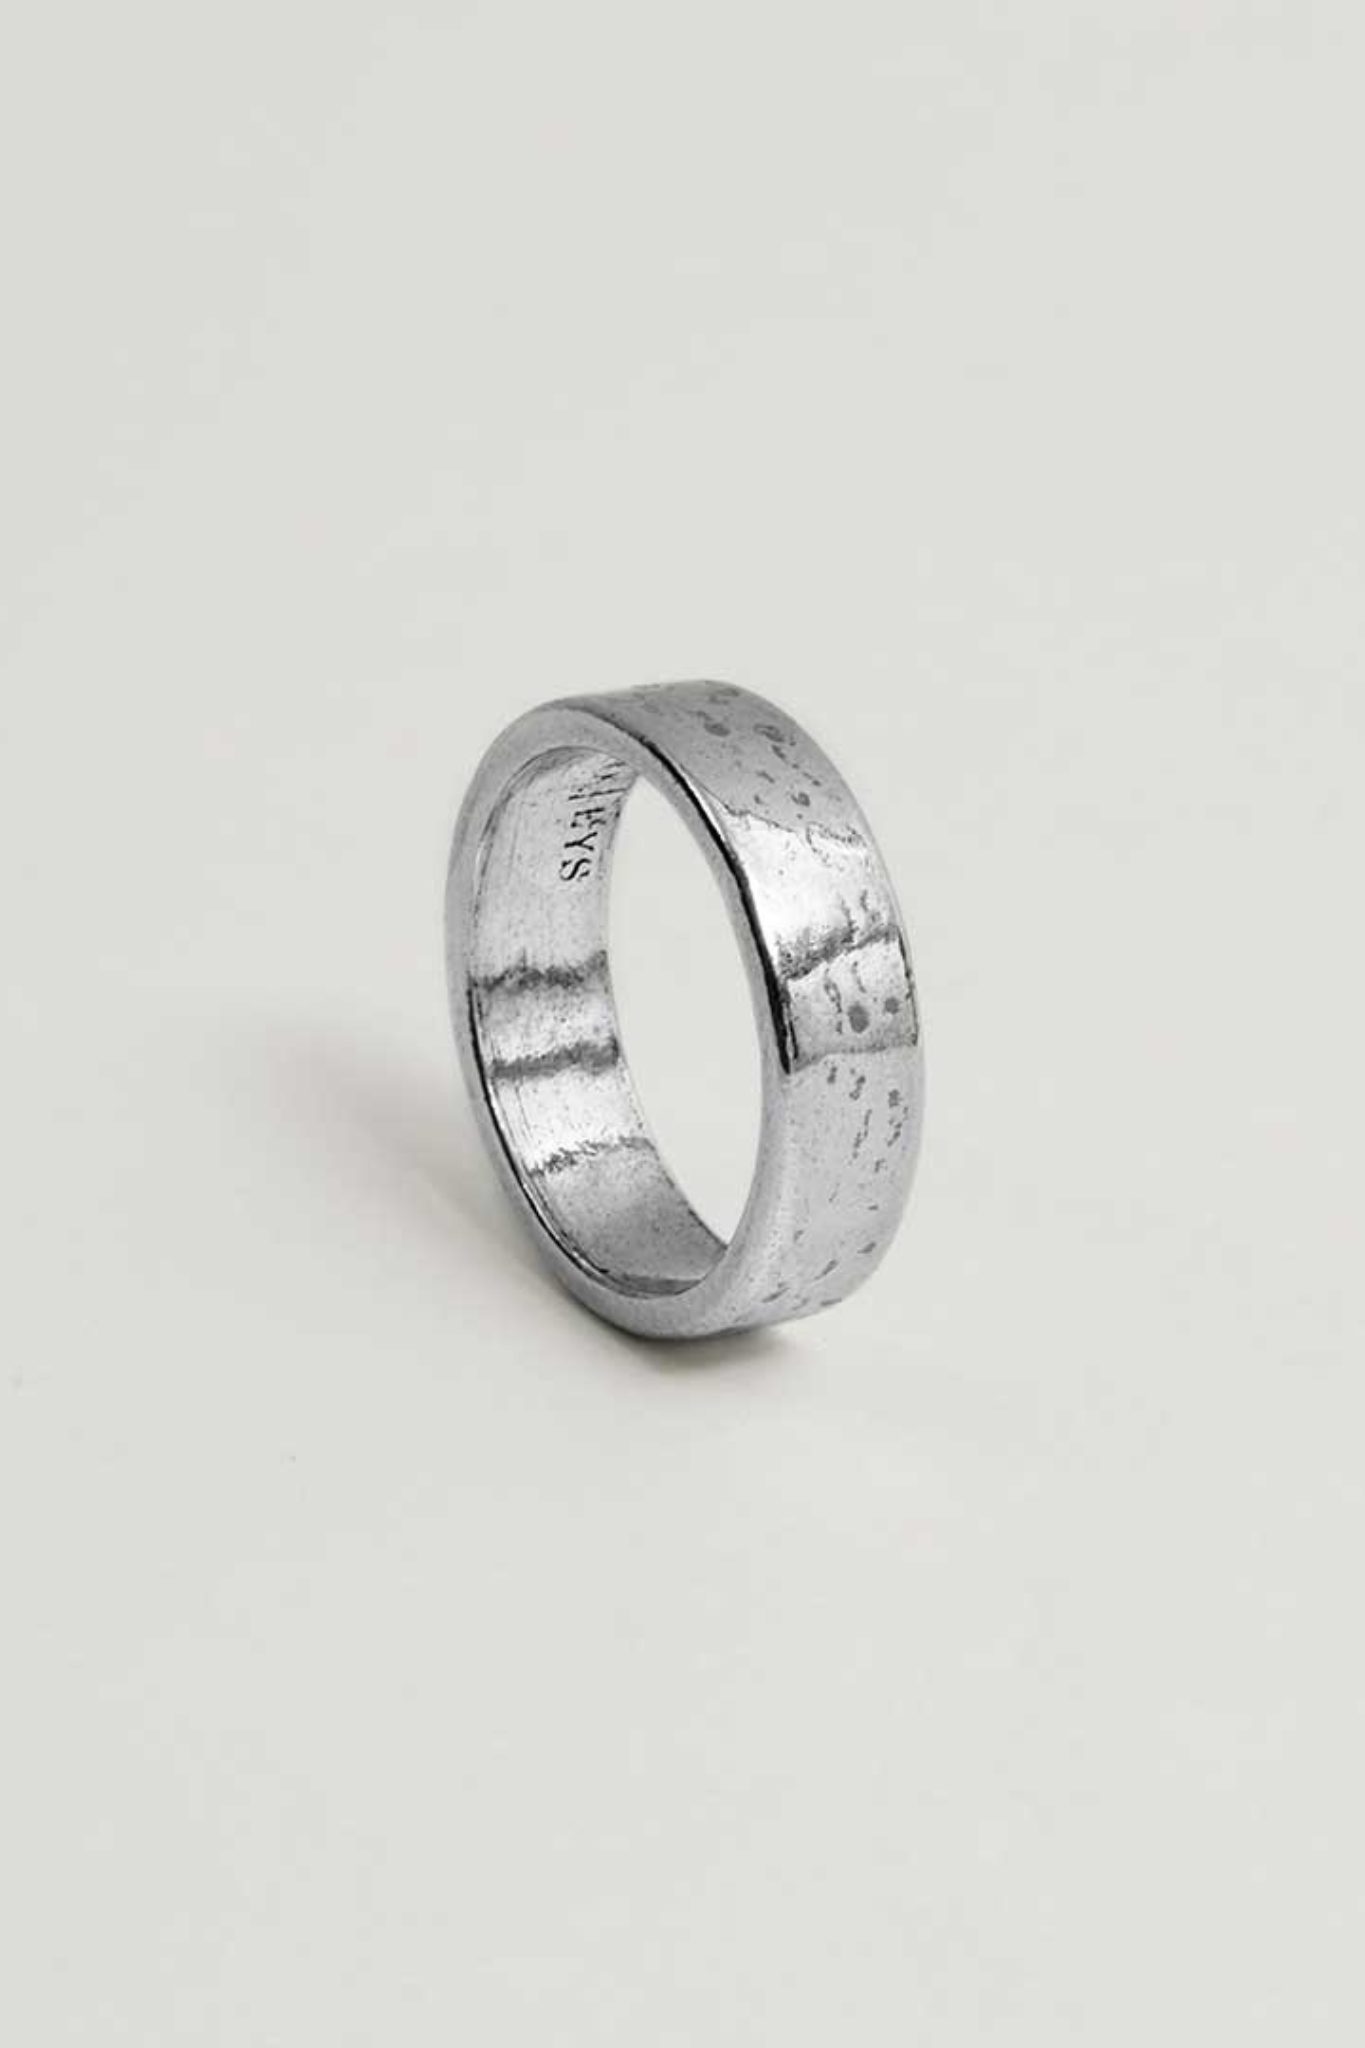 01 RING - SILVER